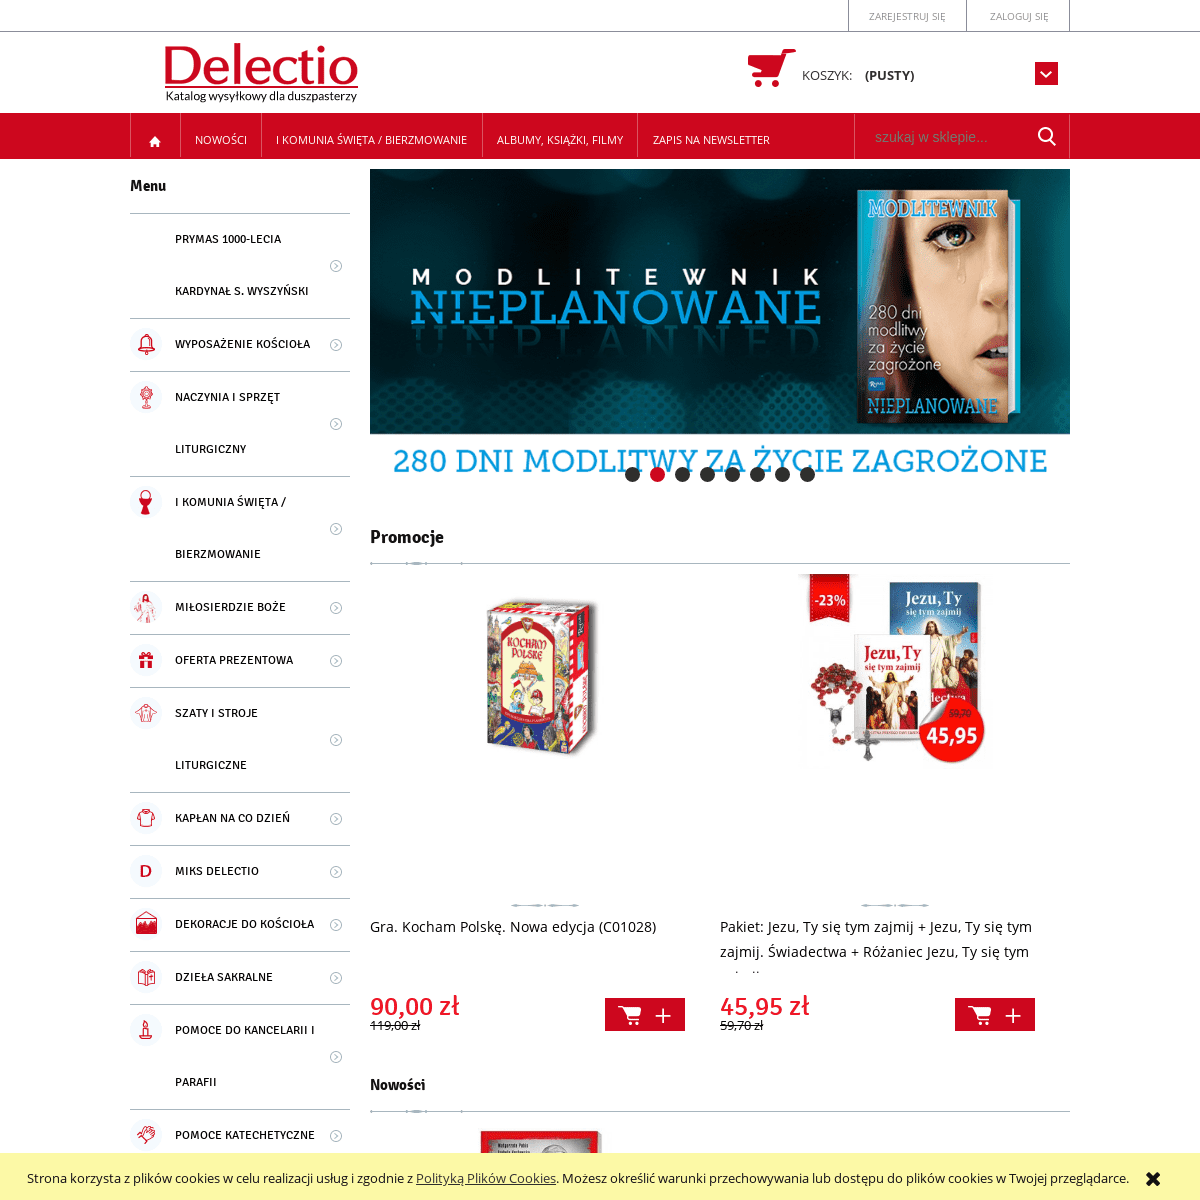 A complete backup of delectio.pl